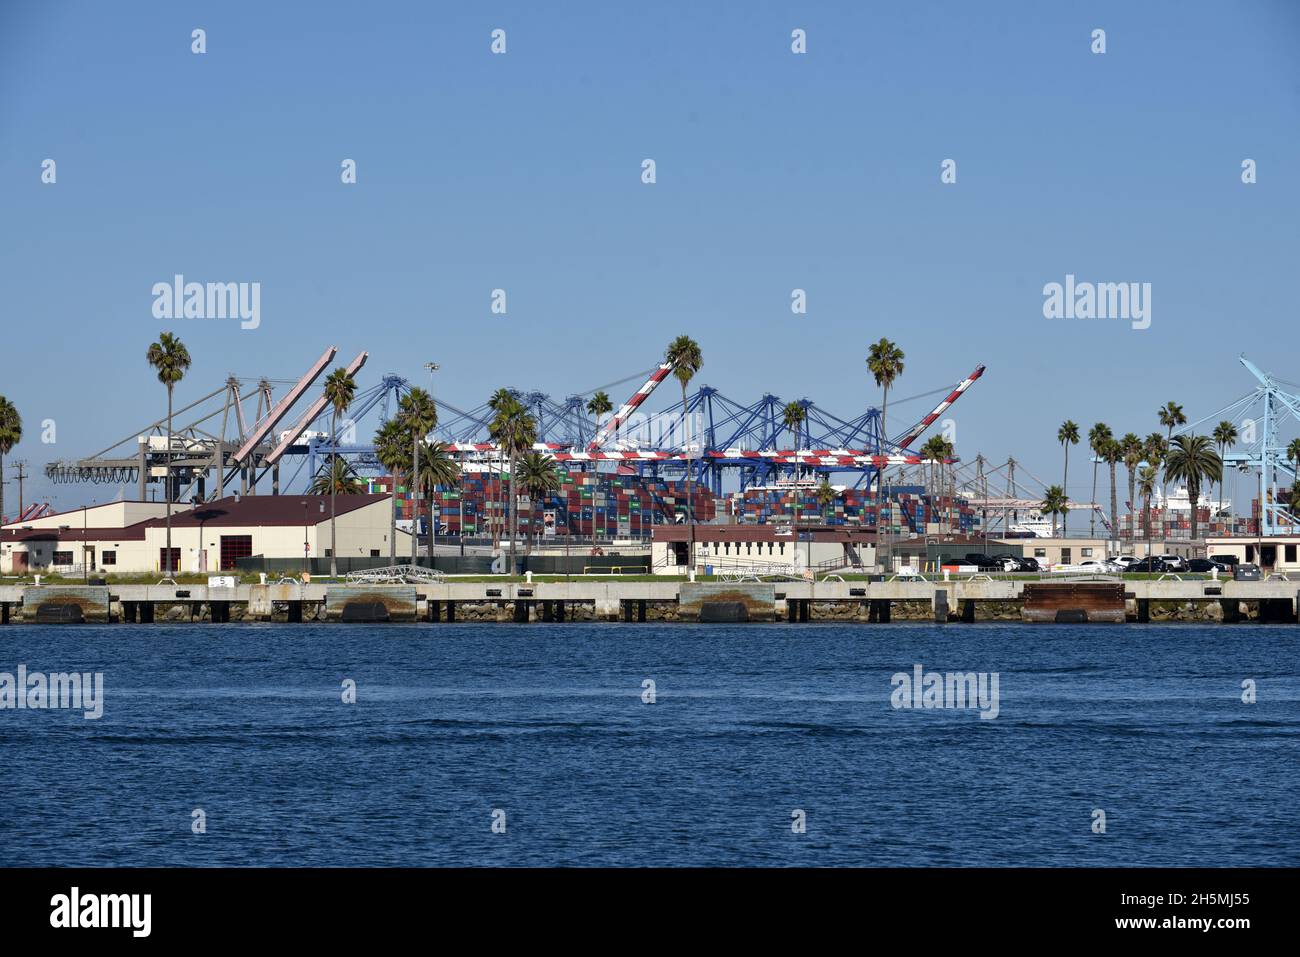 Los Angeles, CA USA - October 15, 2021: Shipping containers and gantry cranes in the main channel of the Port of Los Angeles on a beautiful summer day Stock Photo